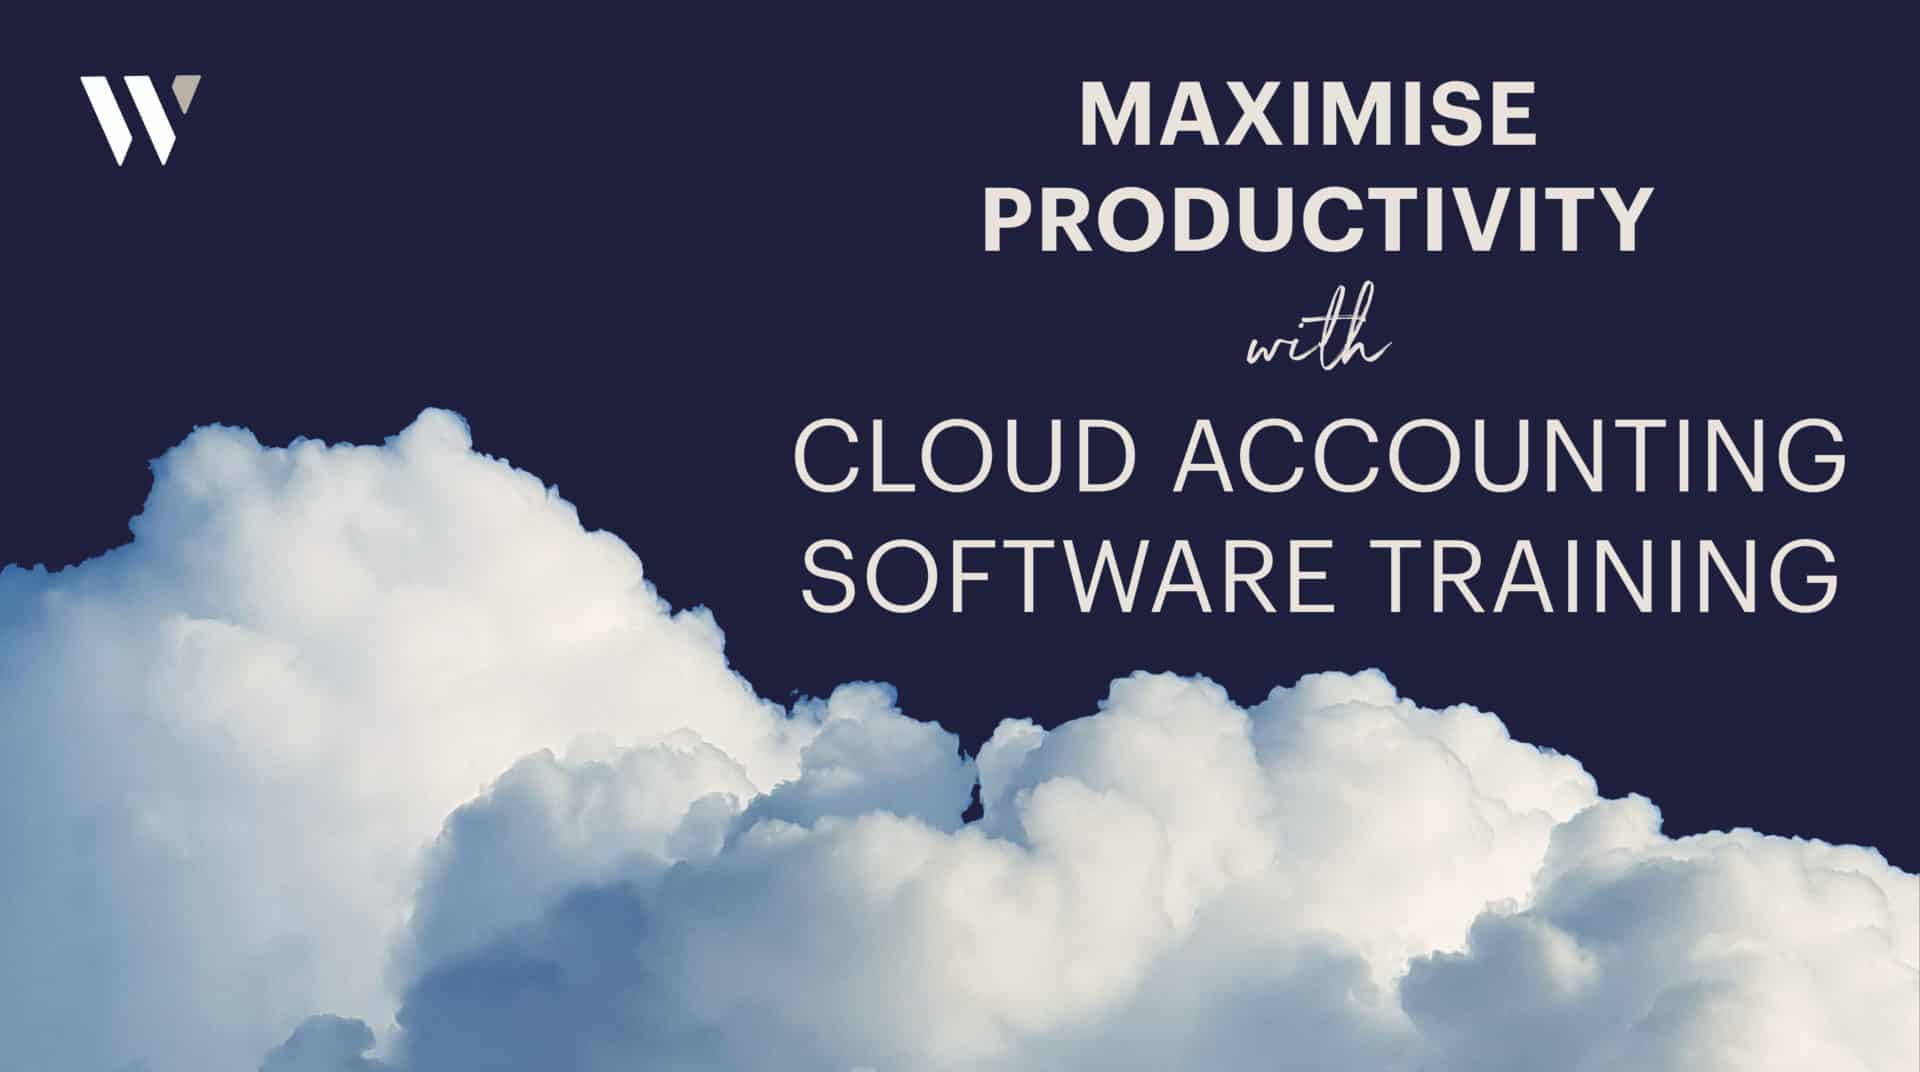 Cloud Accounting Software Training with Whyfield Accountant, Truro